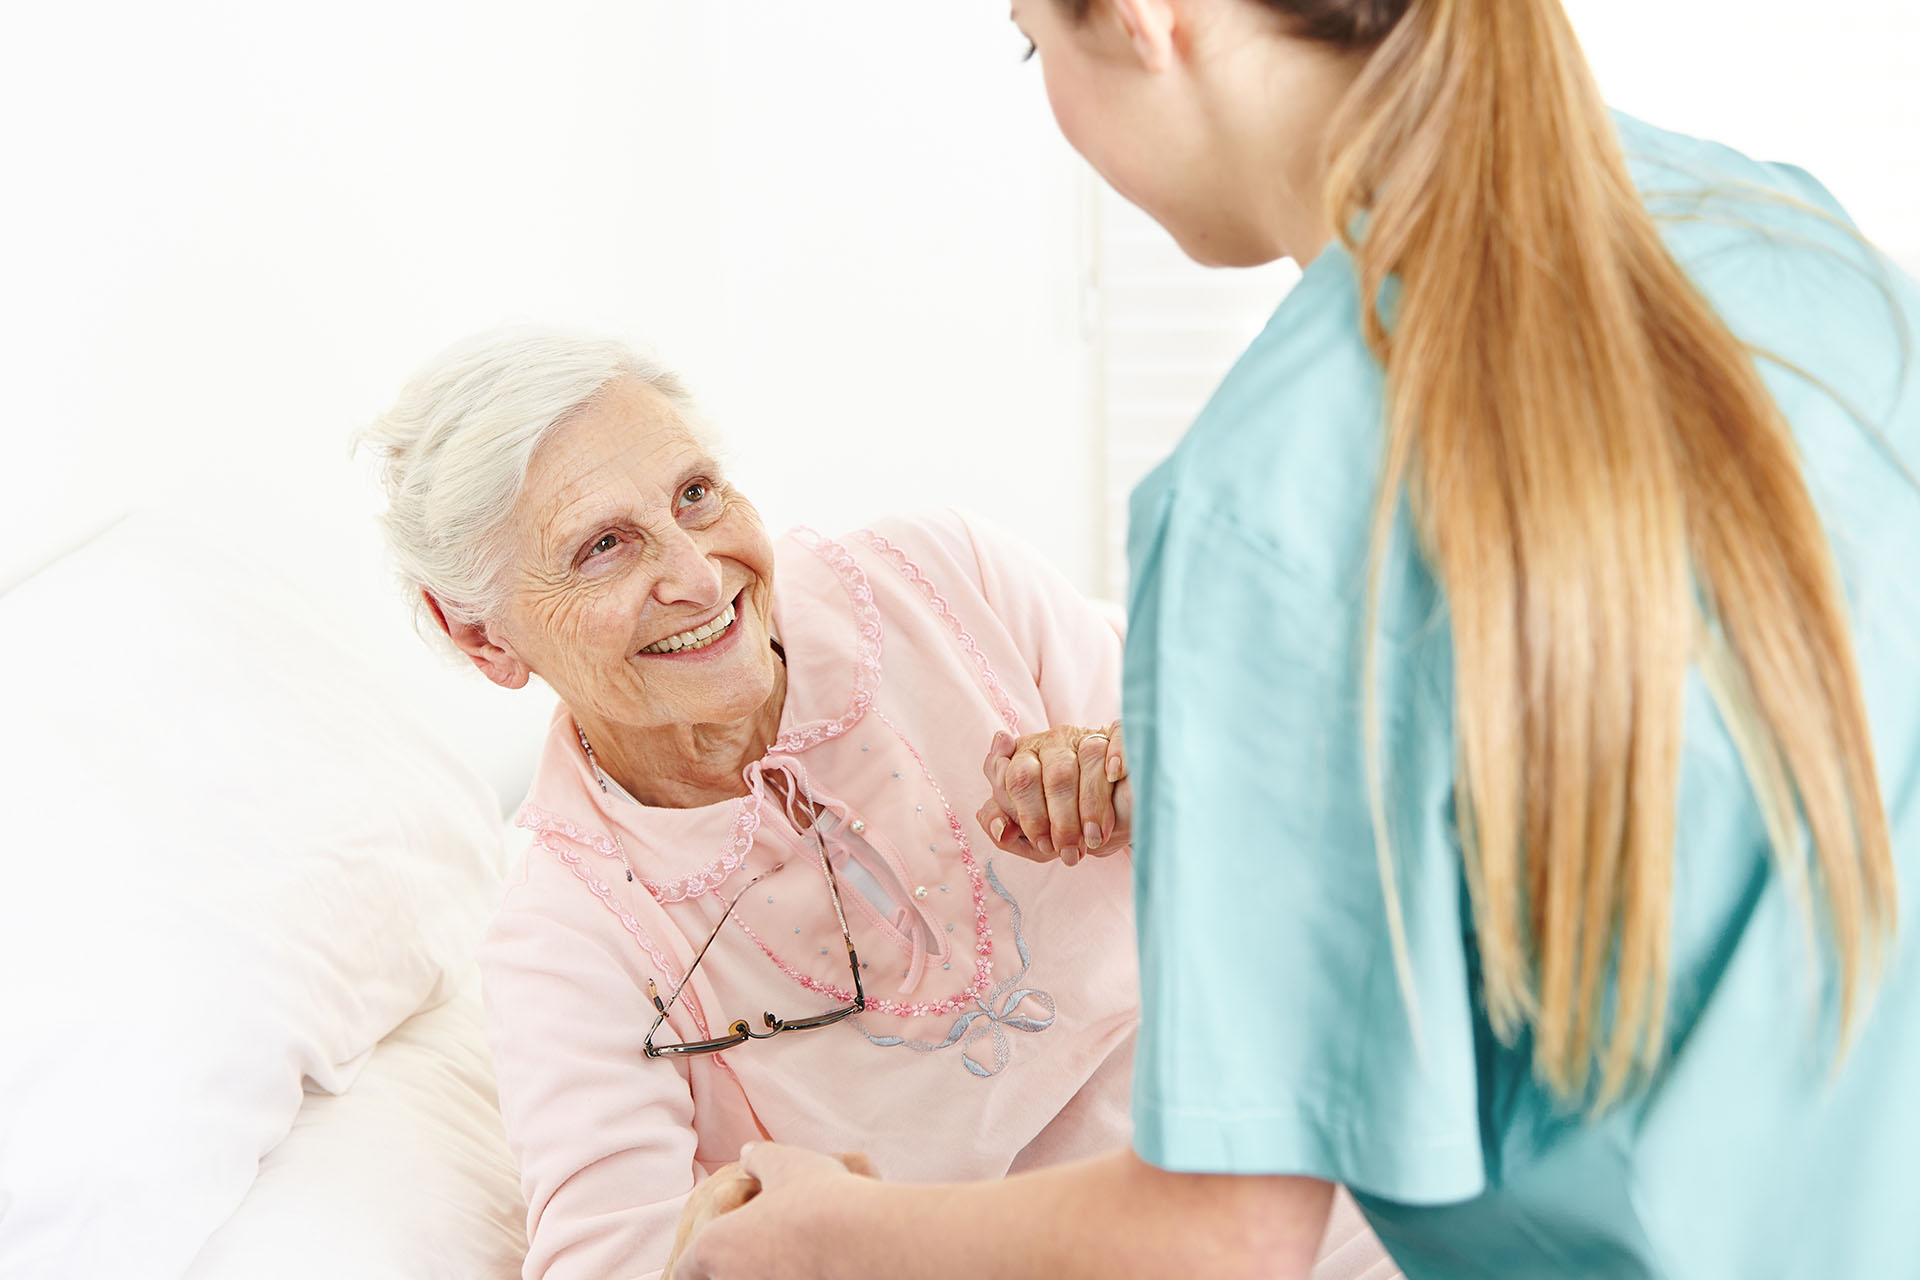 Is it time to provide In-home health care for my elderly loved one in Boca Raton?